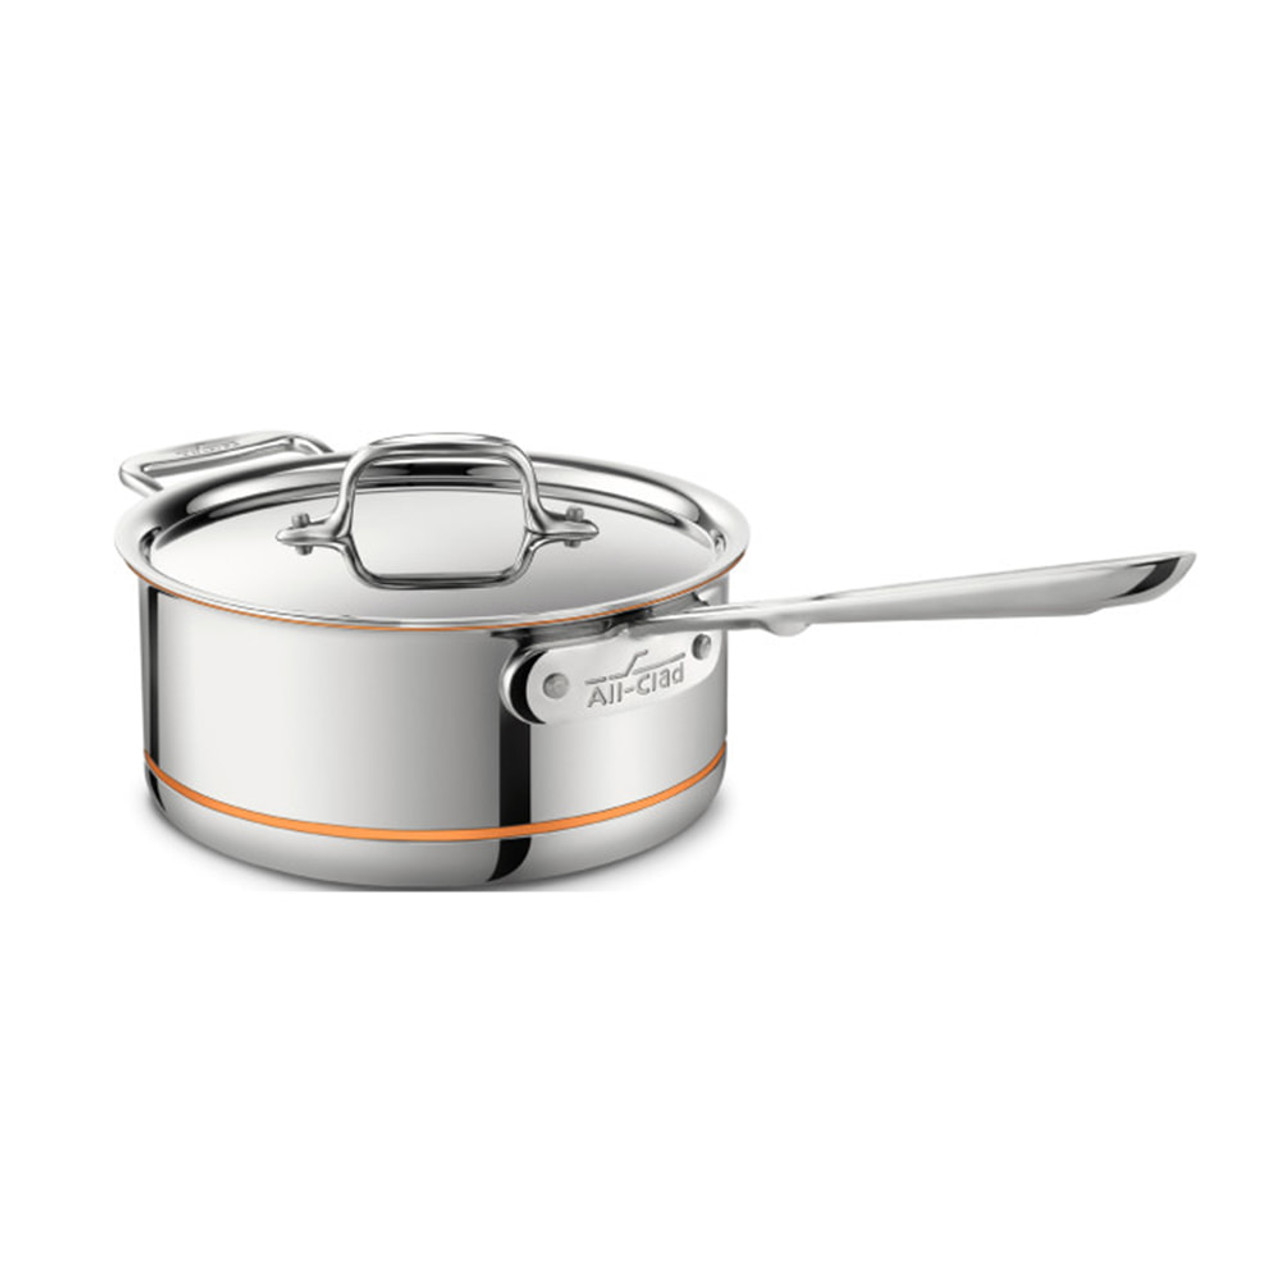 https://cdn11.bigcommerce.com/s-hccytny0od/images/stencil/1280x1280/products/506/1911/all-clad-copper-core-sauce-pan-3qt__53790.1511046680.jpg?c=2?imbypass=on